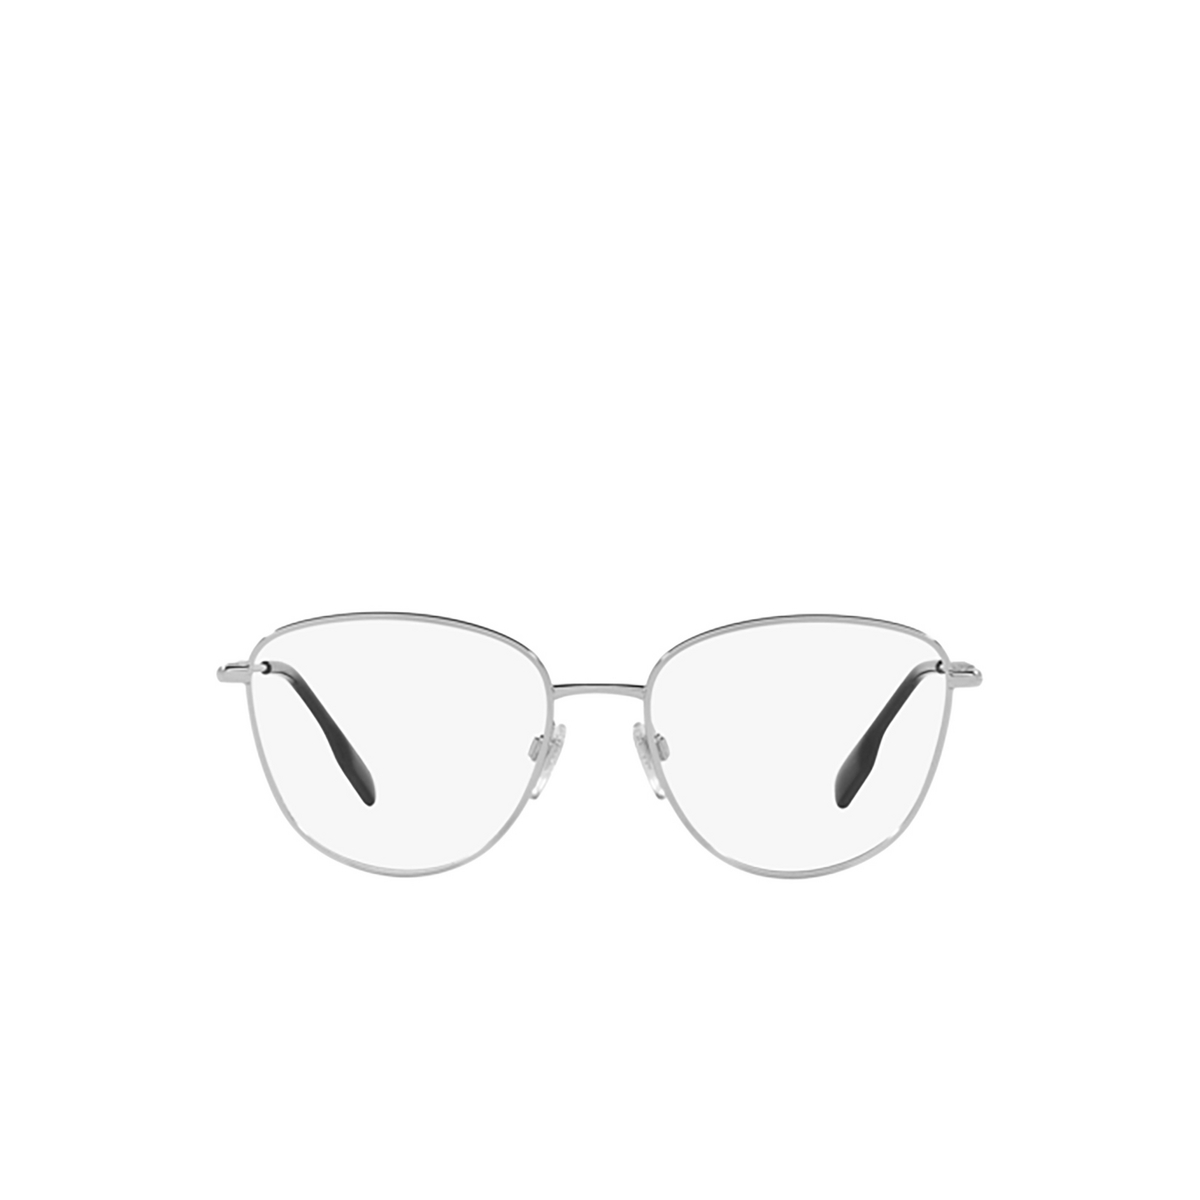 Burberry VIRGINIA Eyeglasses 1005 Silver - front view